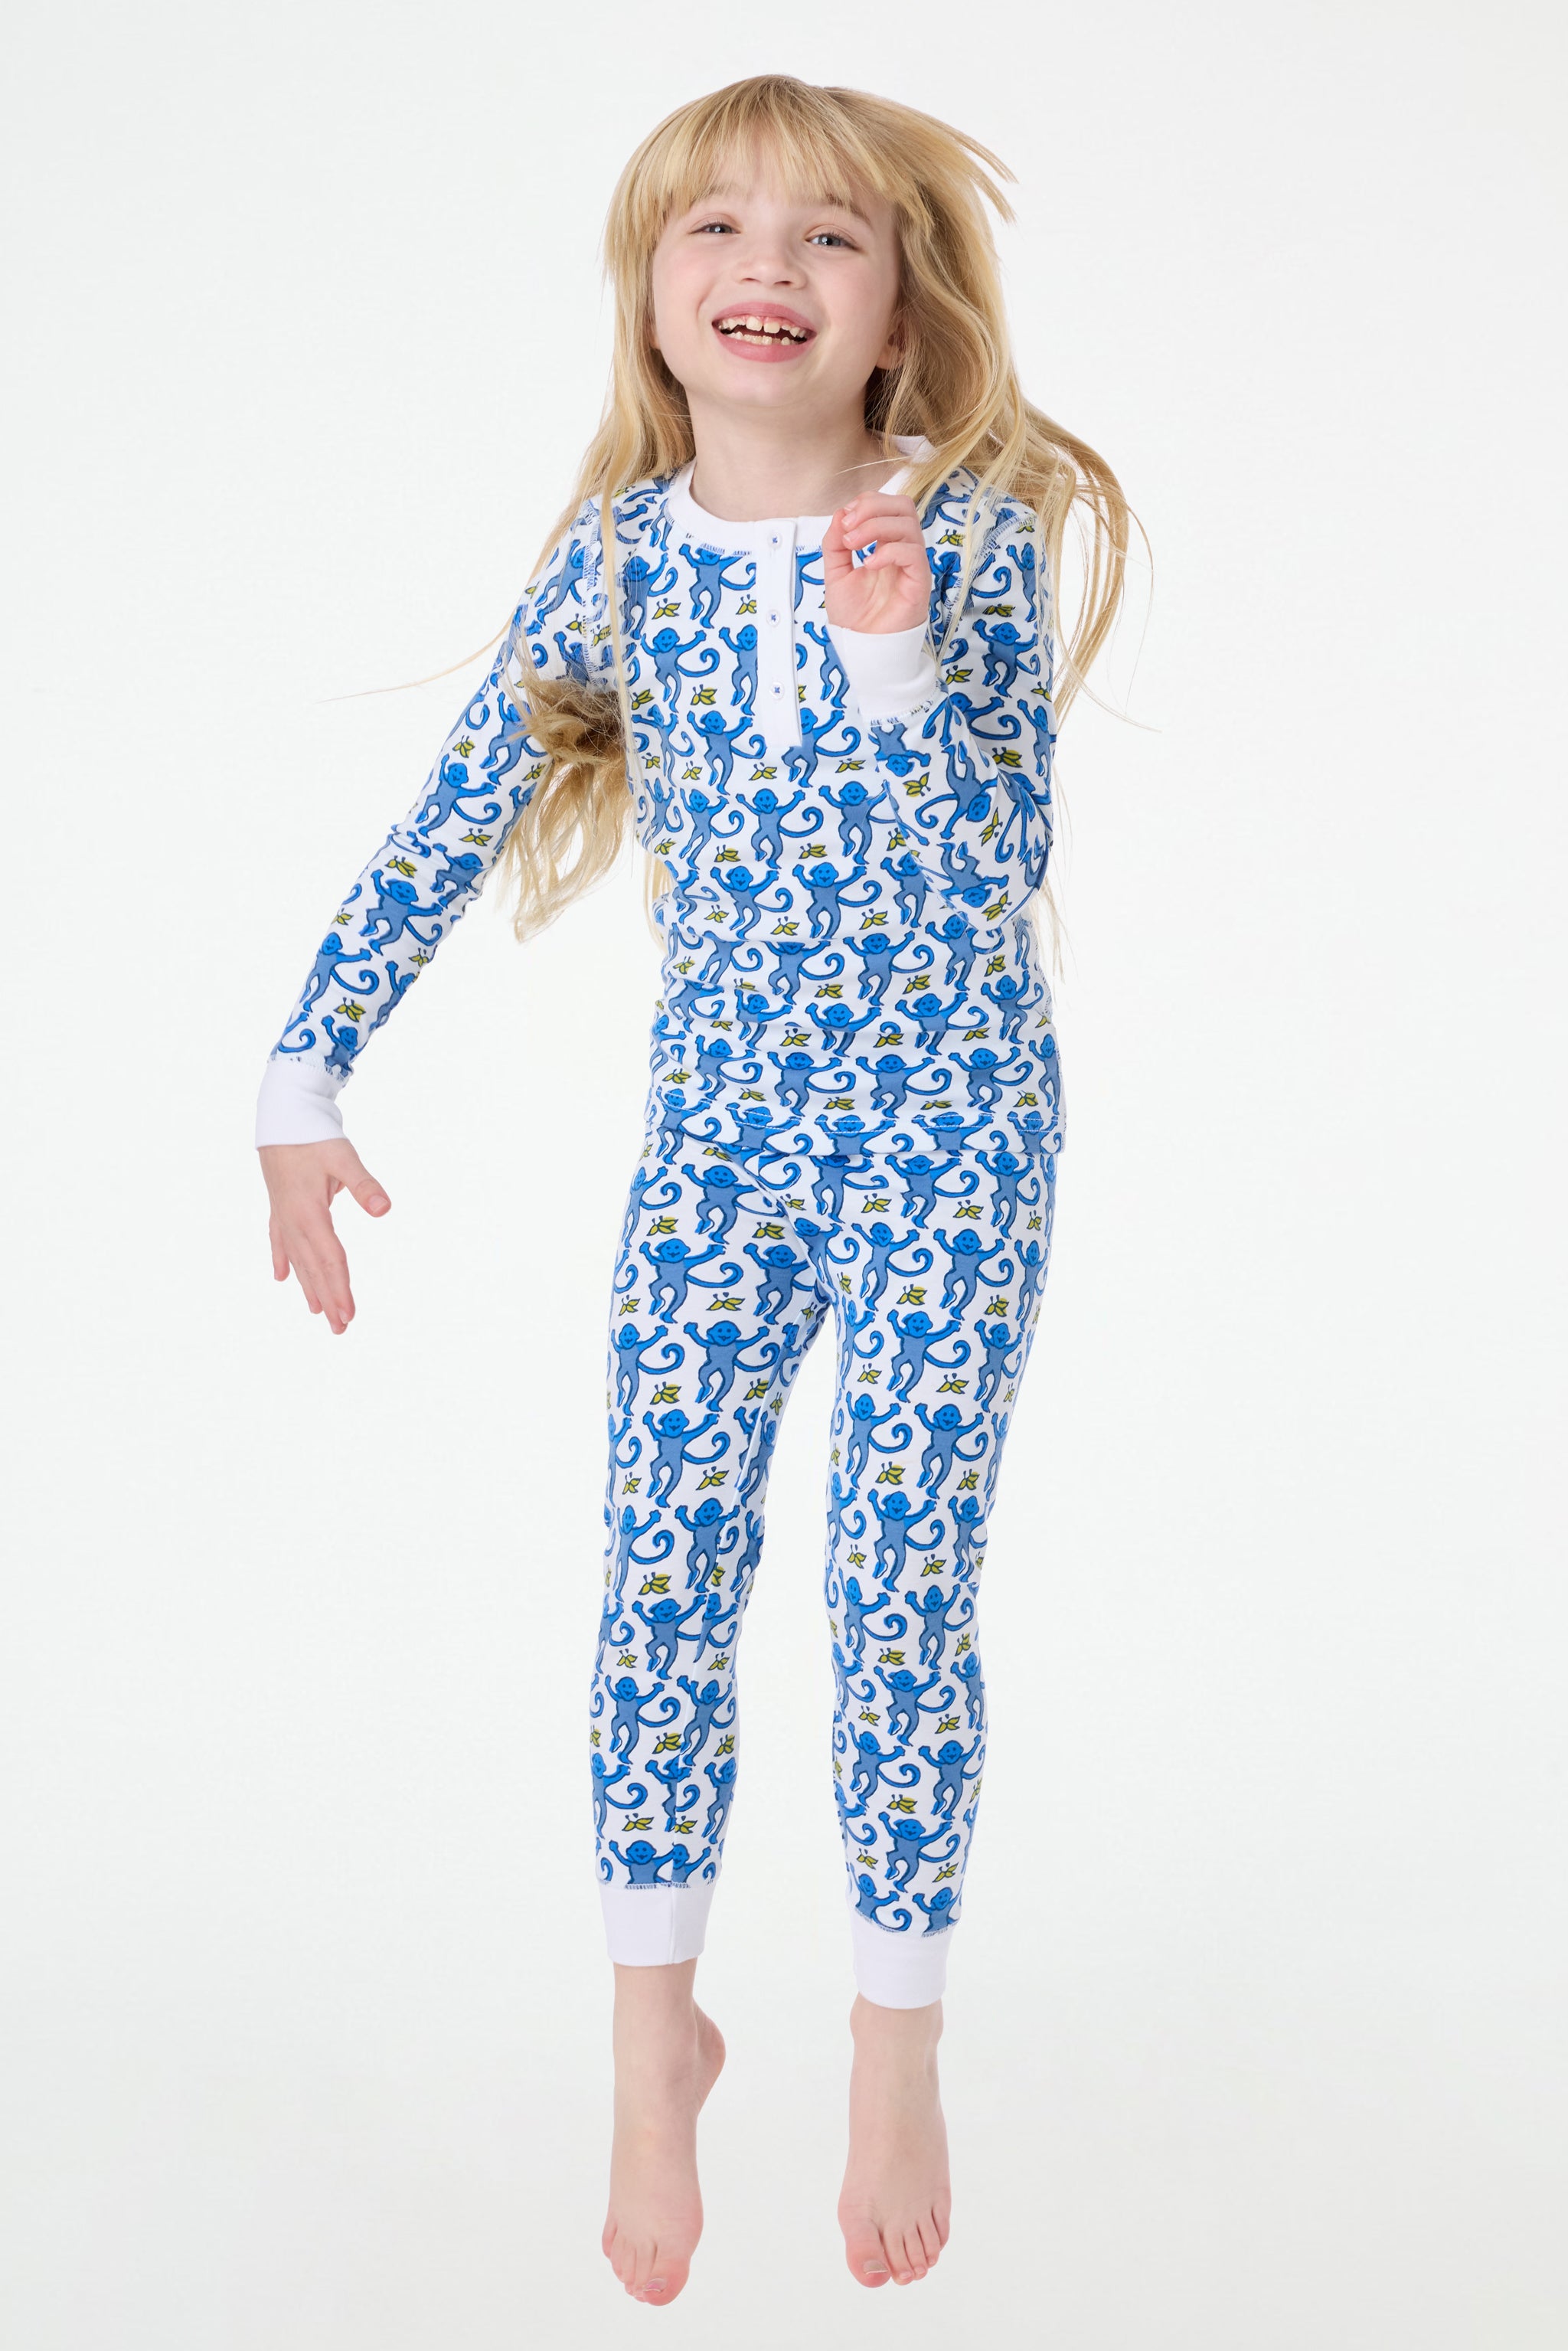 Teenager with Rollers in her Hair Wearing One-Piece Footed Pajamas